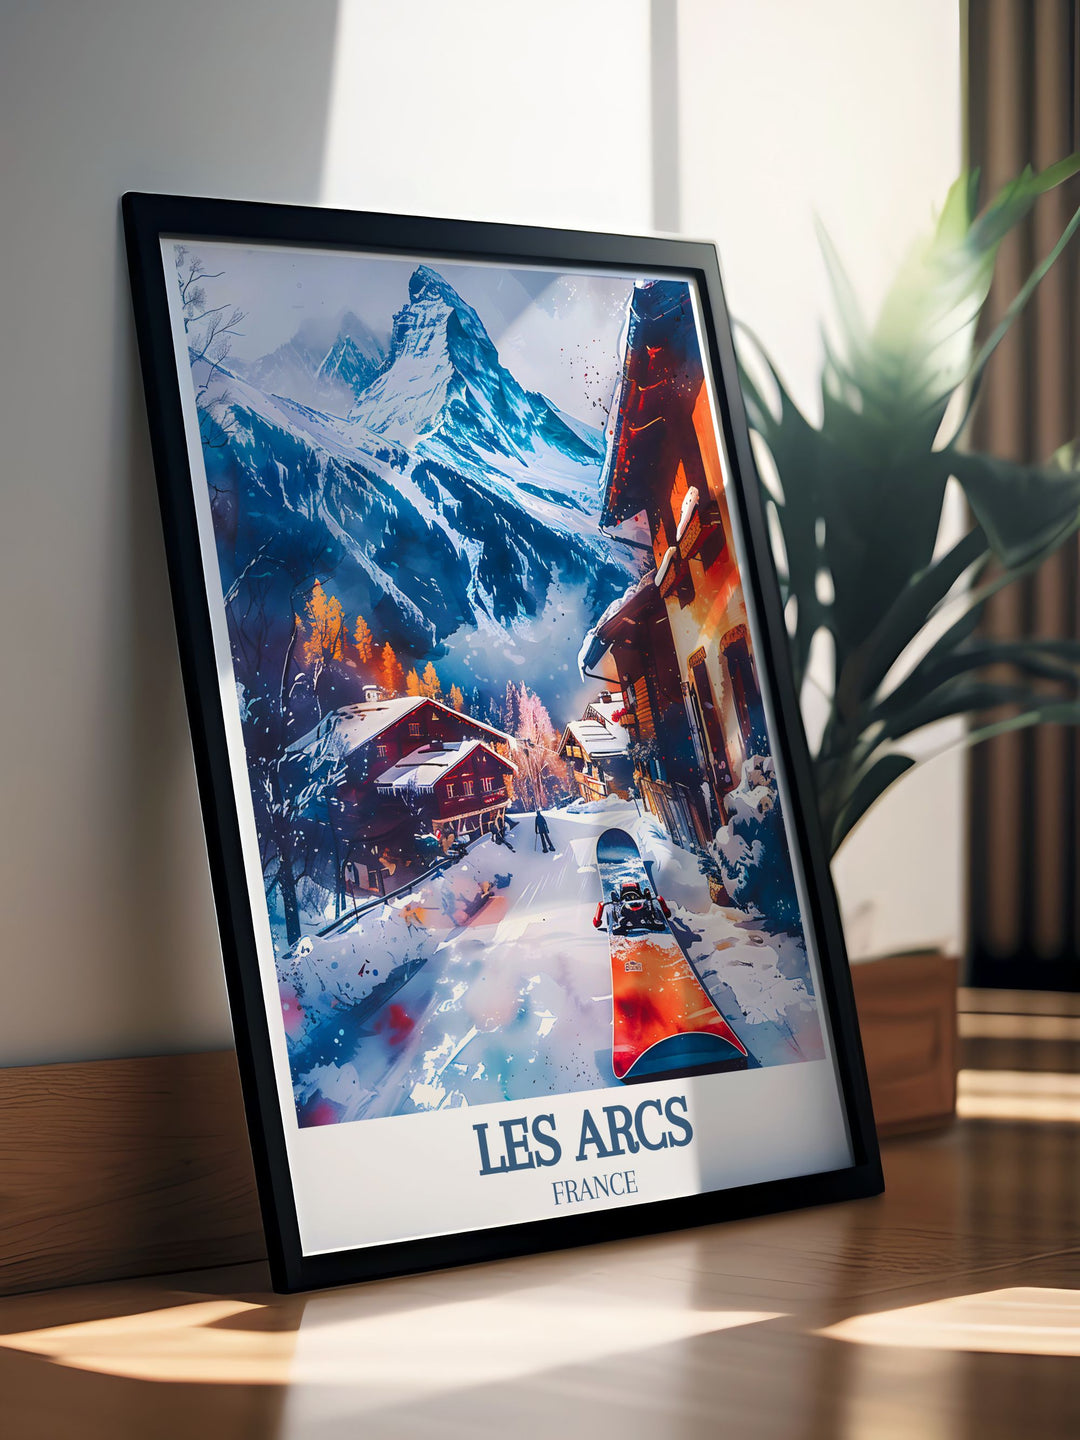 French Alps Poster featuring Paradiski ski area Les Arcs Ski resort Mont Blanc capturing the breathtaking beauty of the mountains perfect for adding a touch of adventure to any room